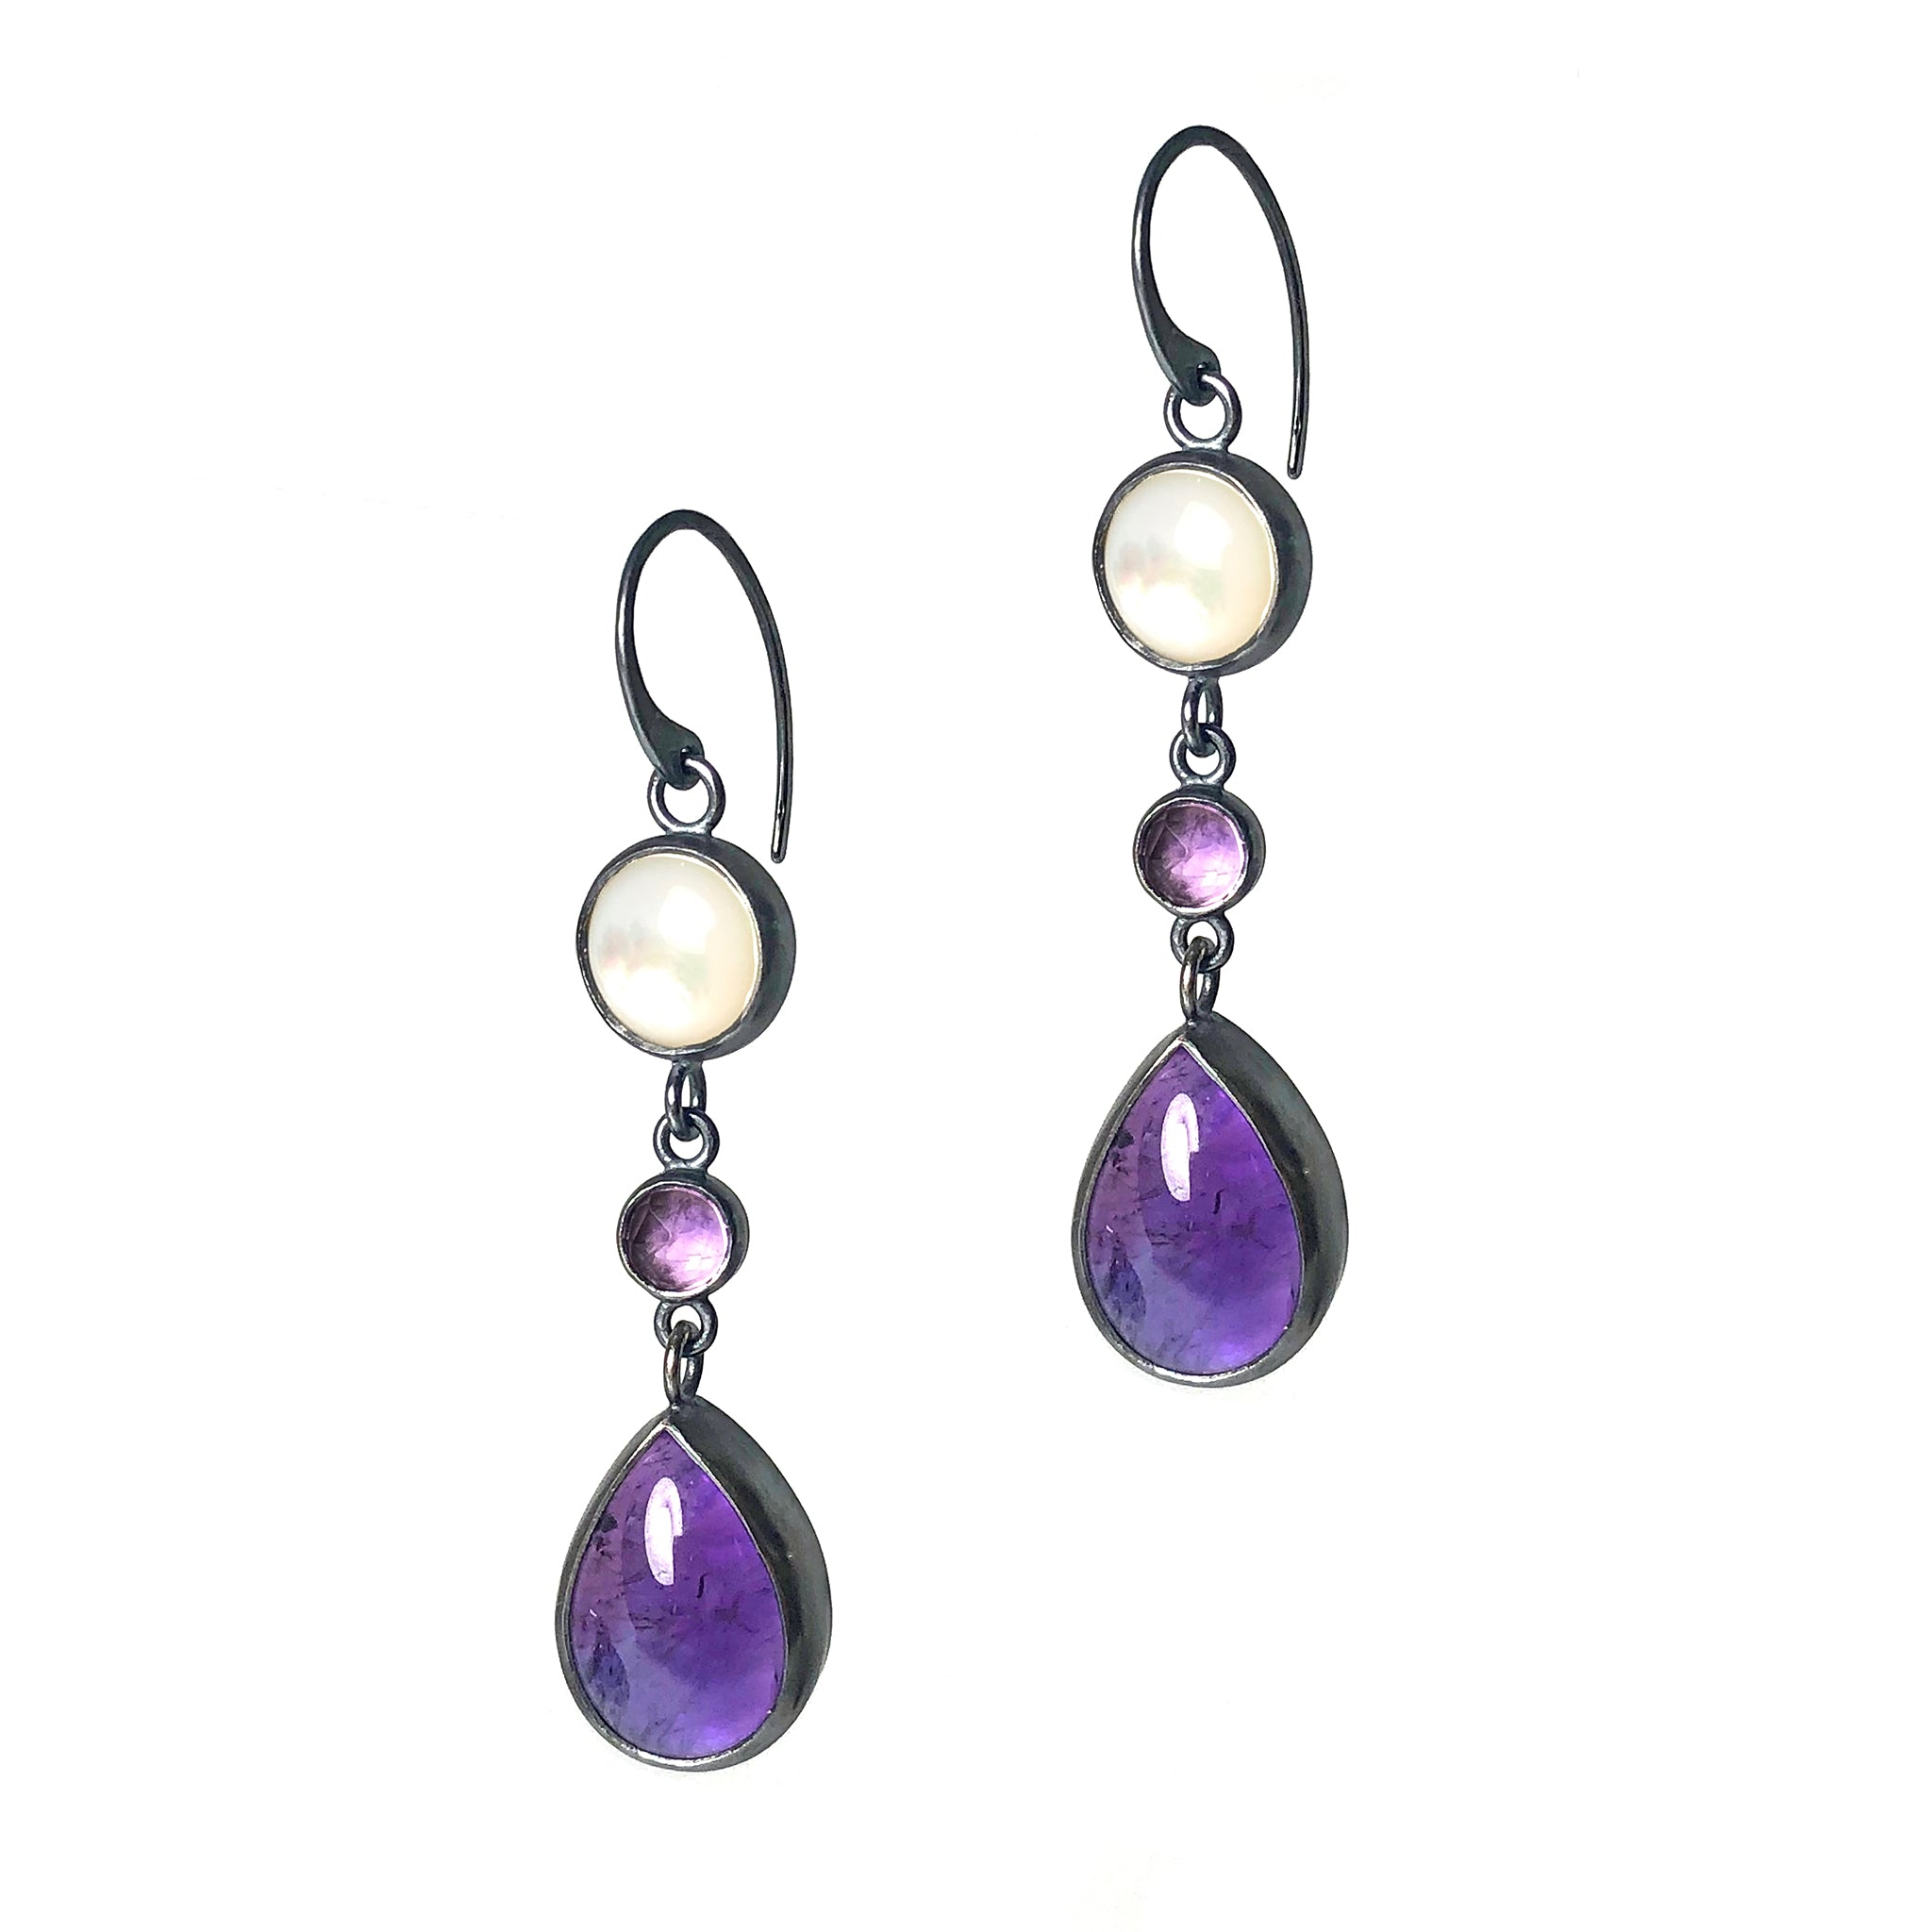 Amethyst + Mother of Pearl Dangle Earrings.  "Enamored Adornments" Collection by Alex Lozier Jewelry.